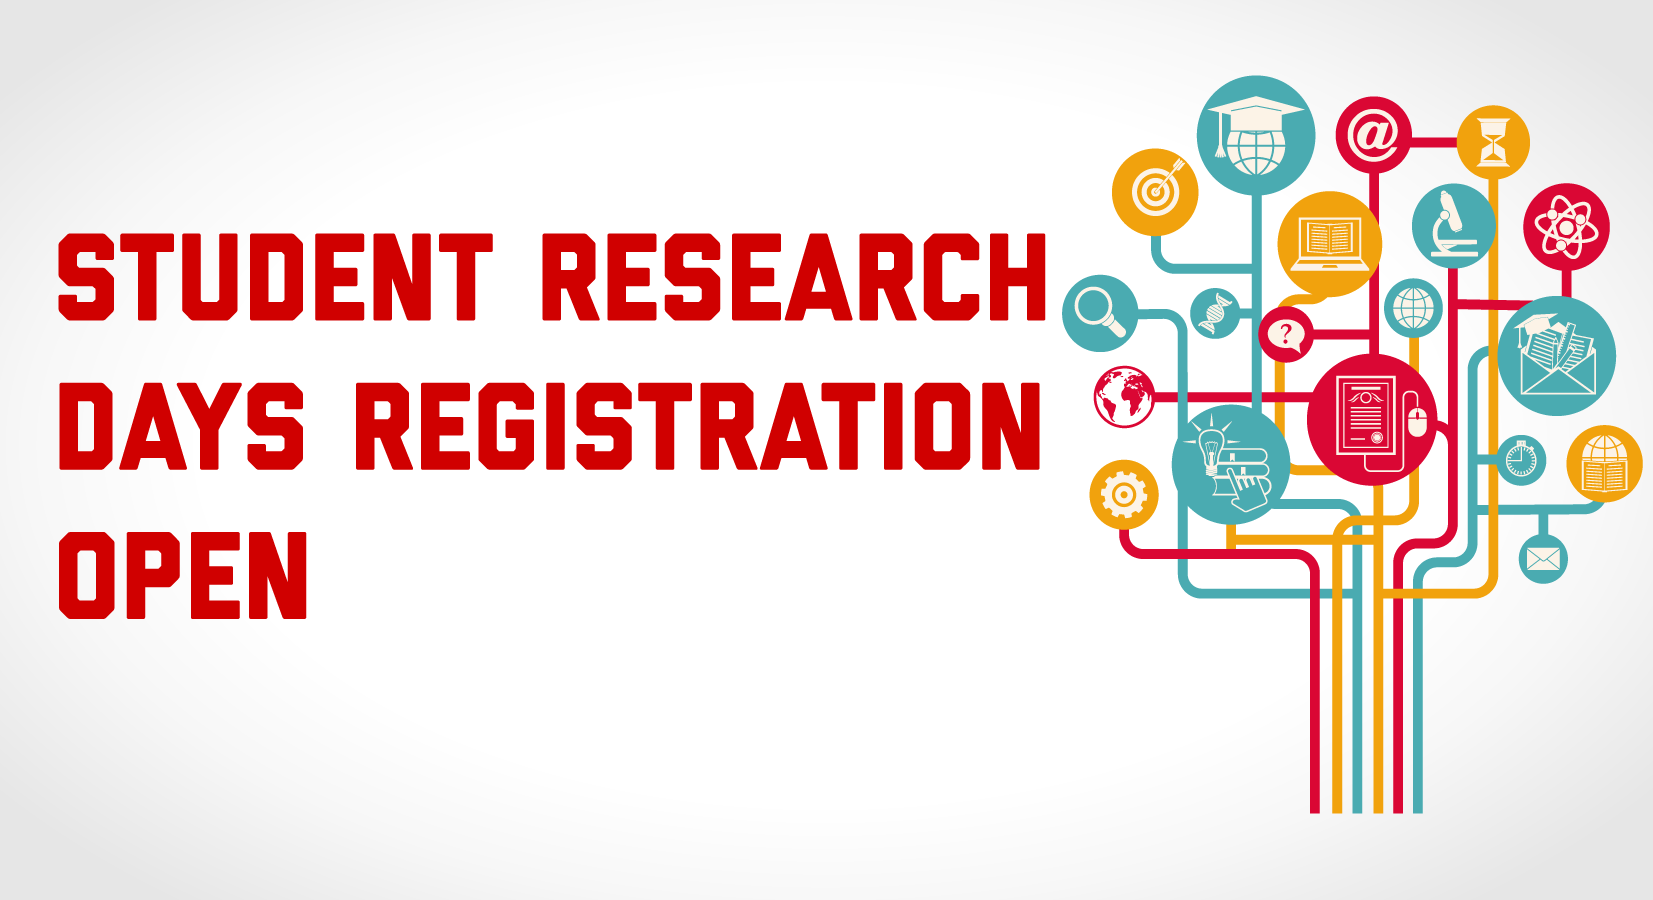 Student Research Days Registration open